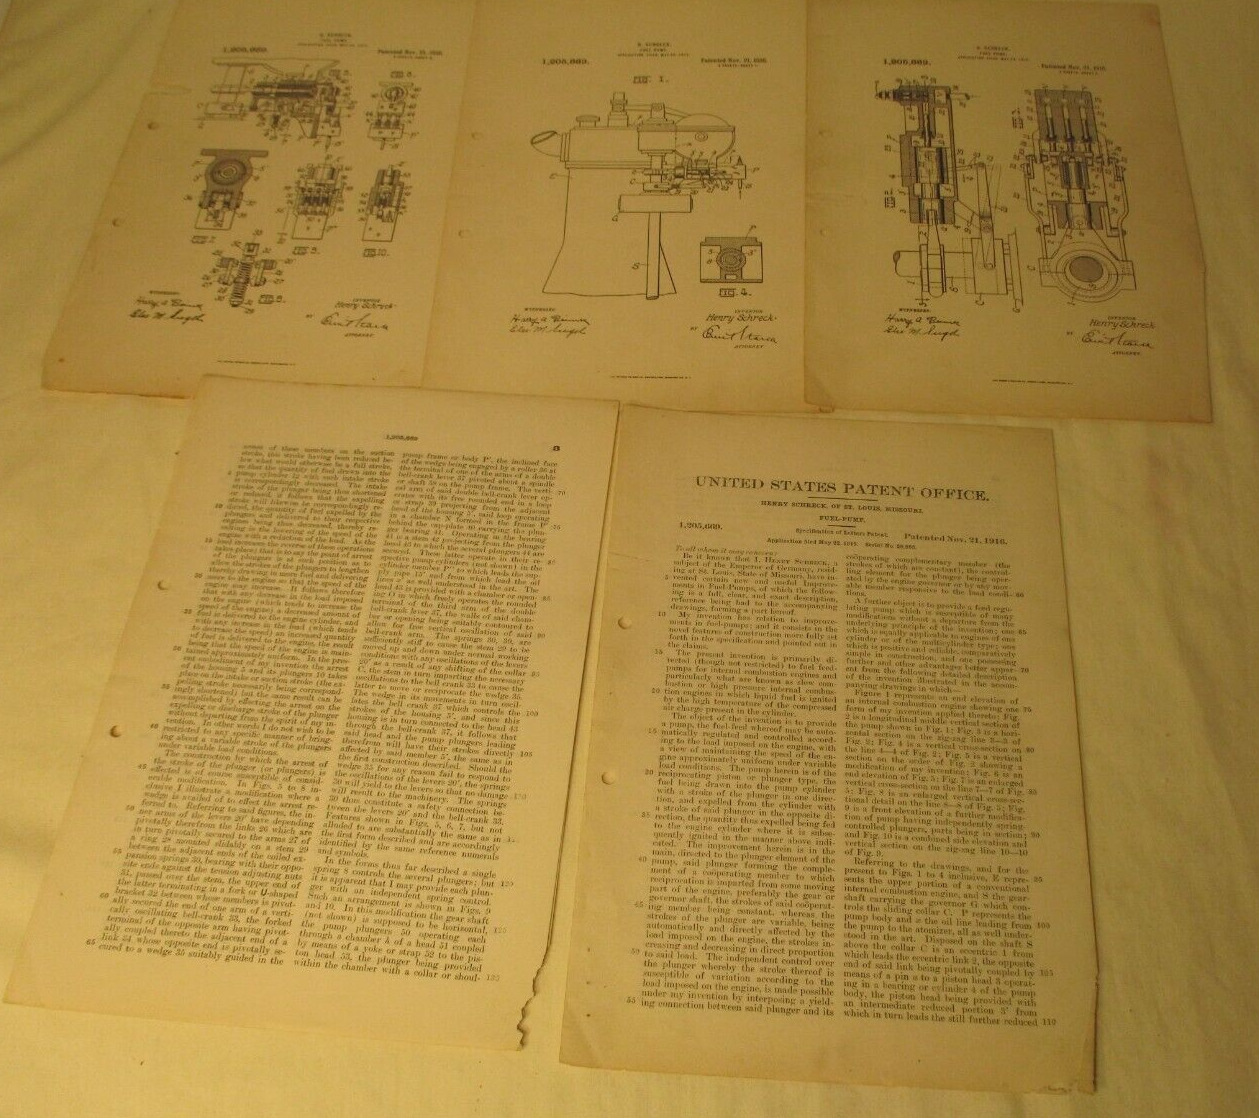 1916 UNITED STATES PATENT OFFICE Patent FUEL PUMP - 6 PAGES (3 Illustrated)